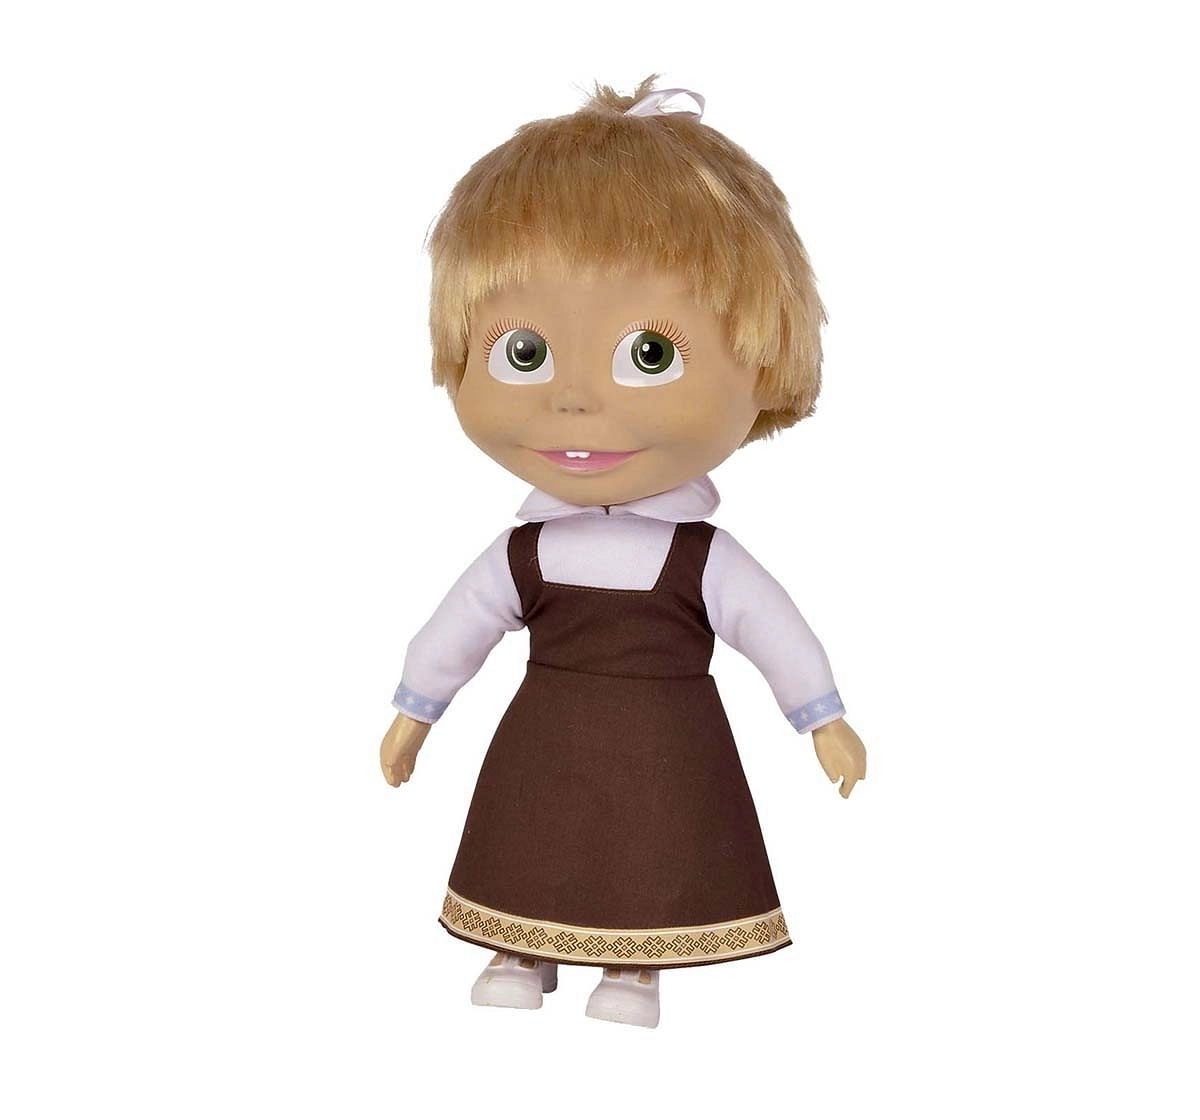 Masha And The Bear - Singing Doll 30Cm & Accessories for age 3Y+ 